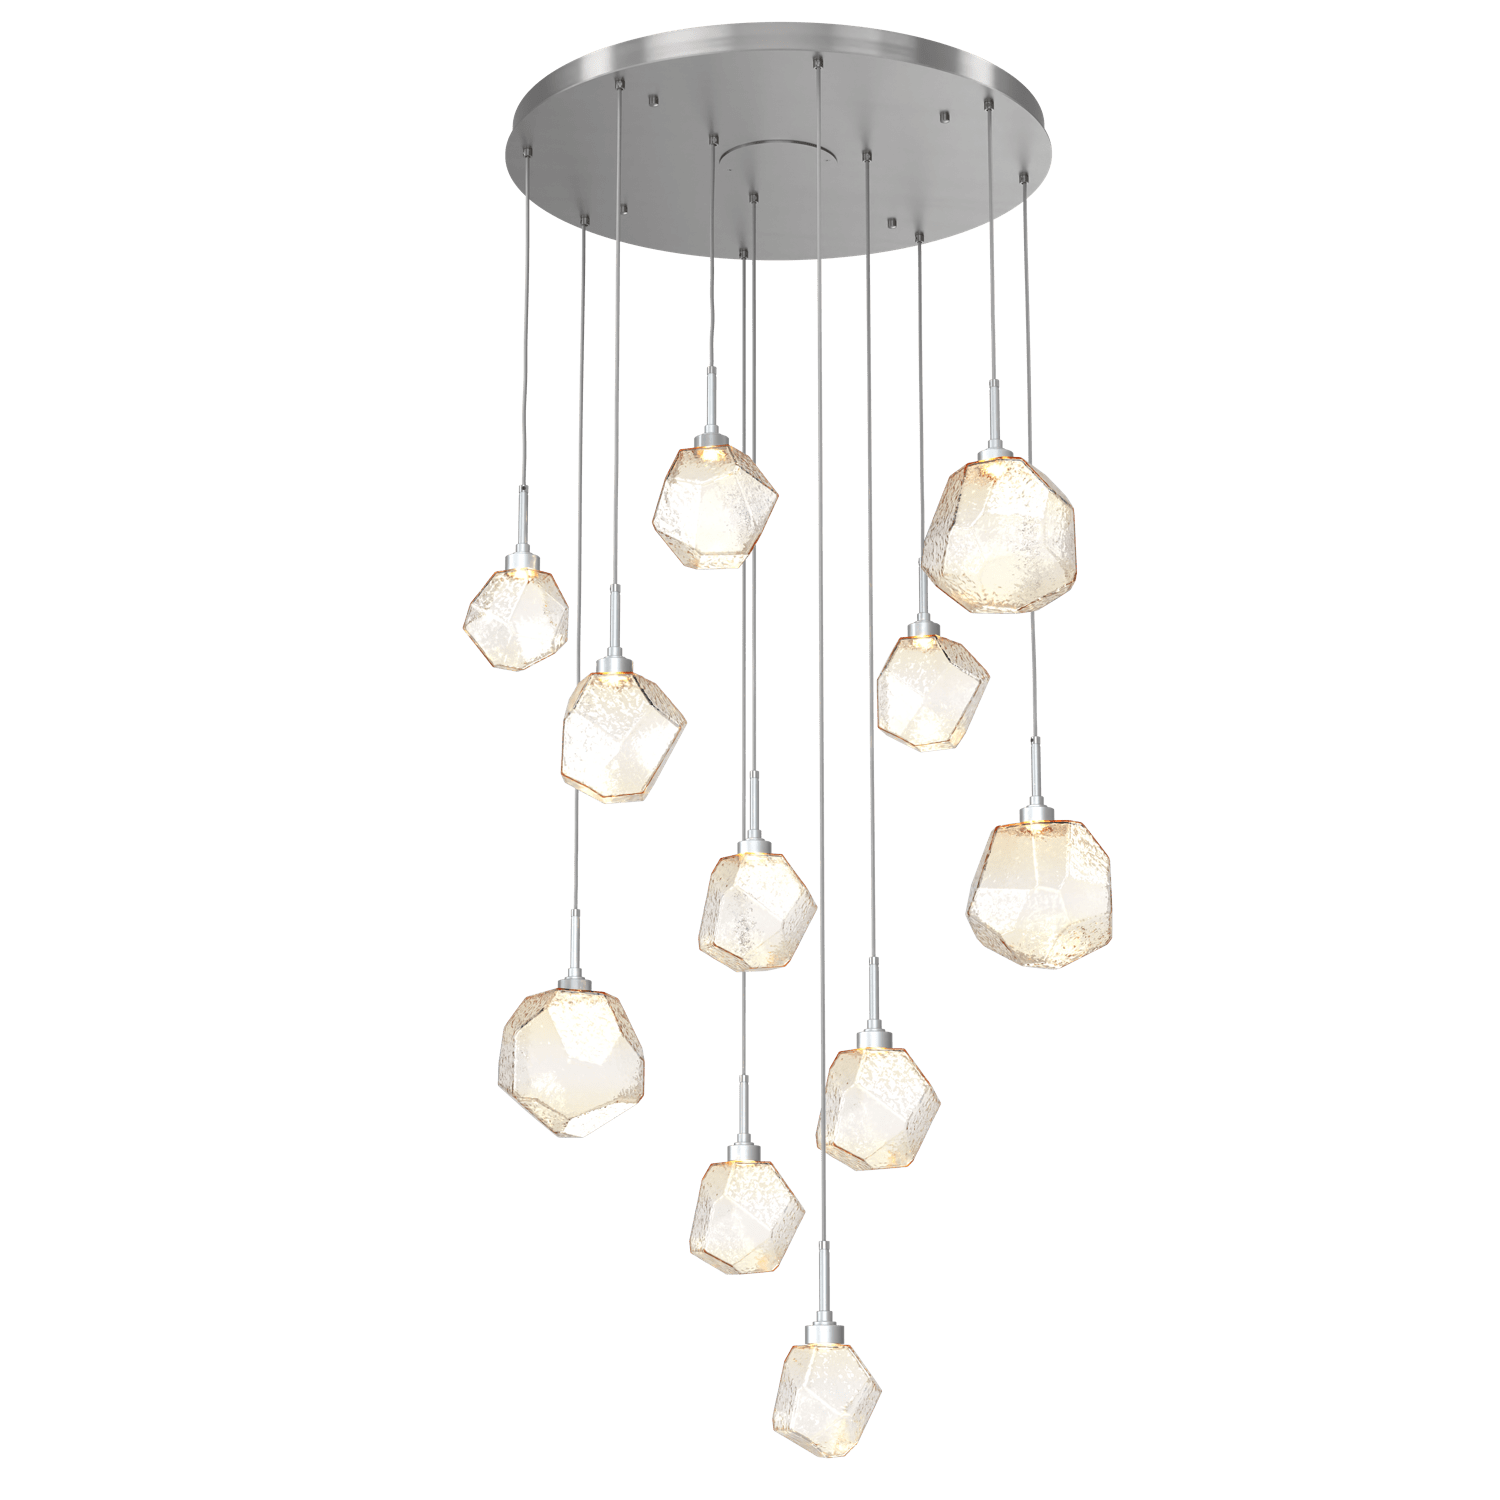 CHB0039-11-SN-A-Hammerton-Studio-Gem-11-light-round-pendant-chandelier-with-satin-nickel-finish-and-amber-blown-glass-shades-and-LED-lamping